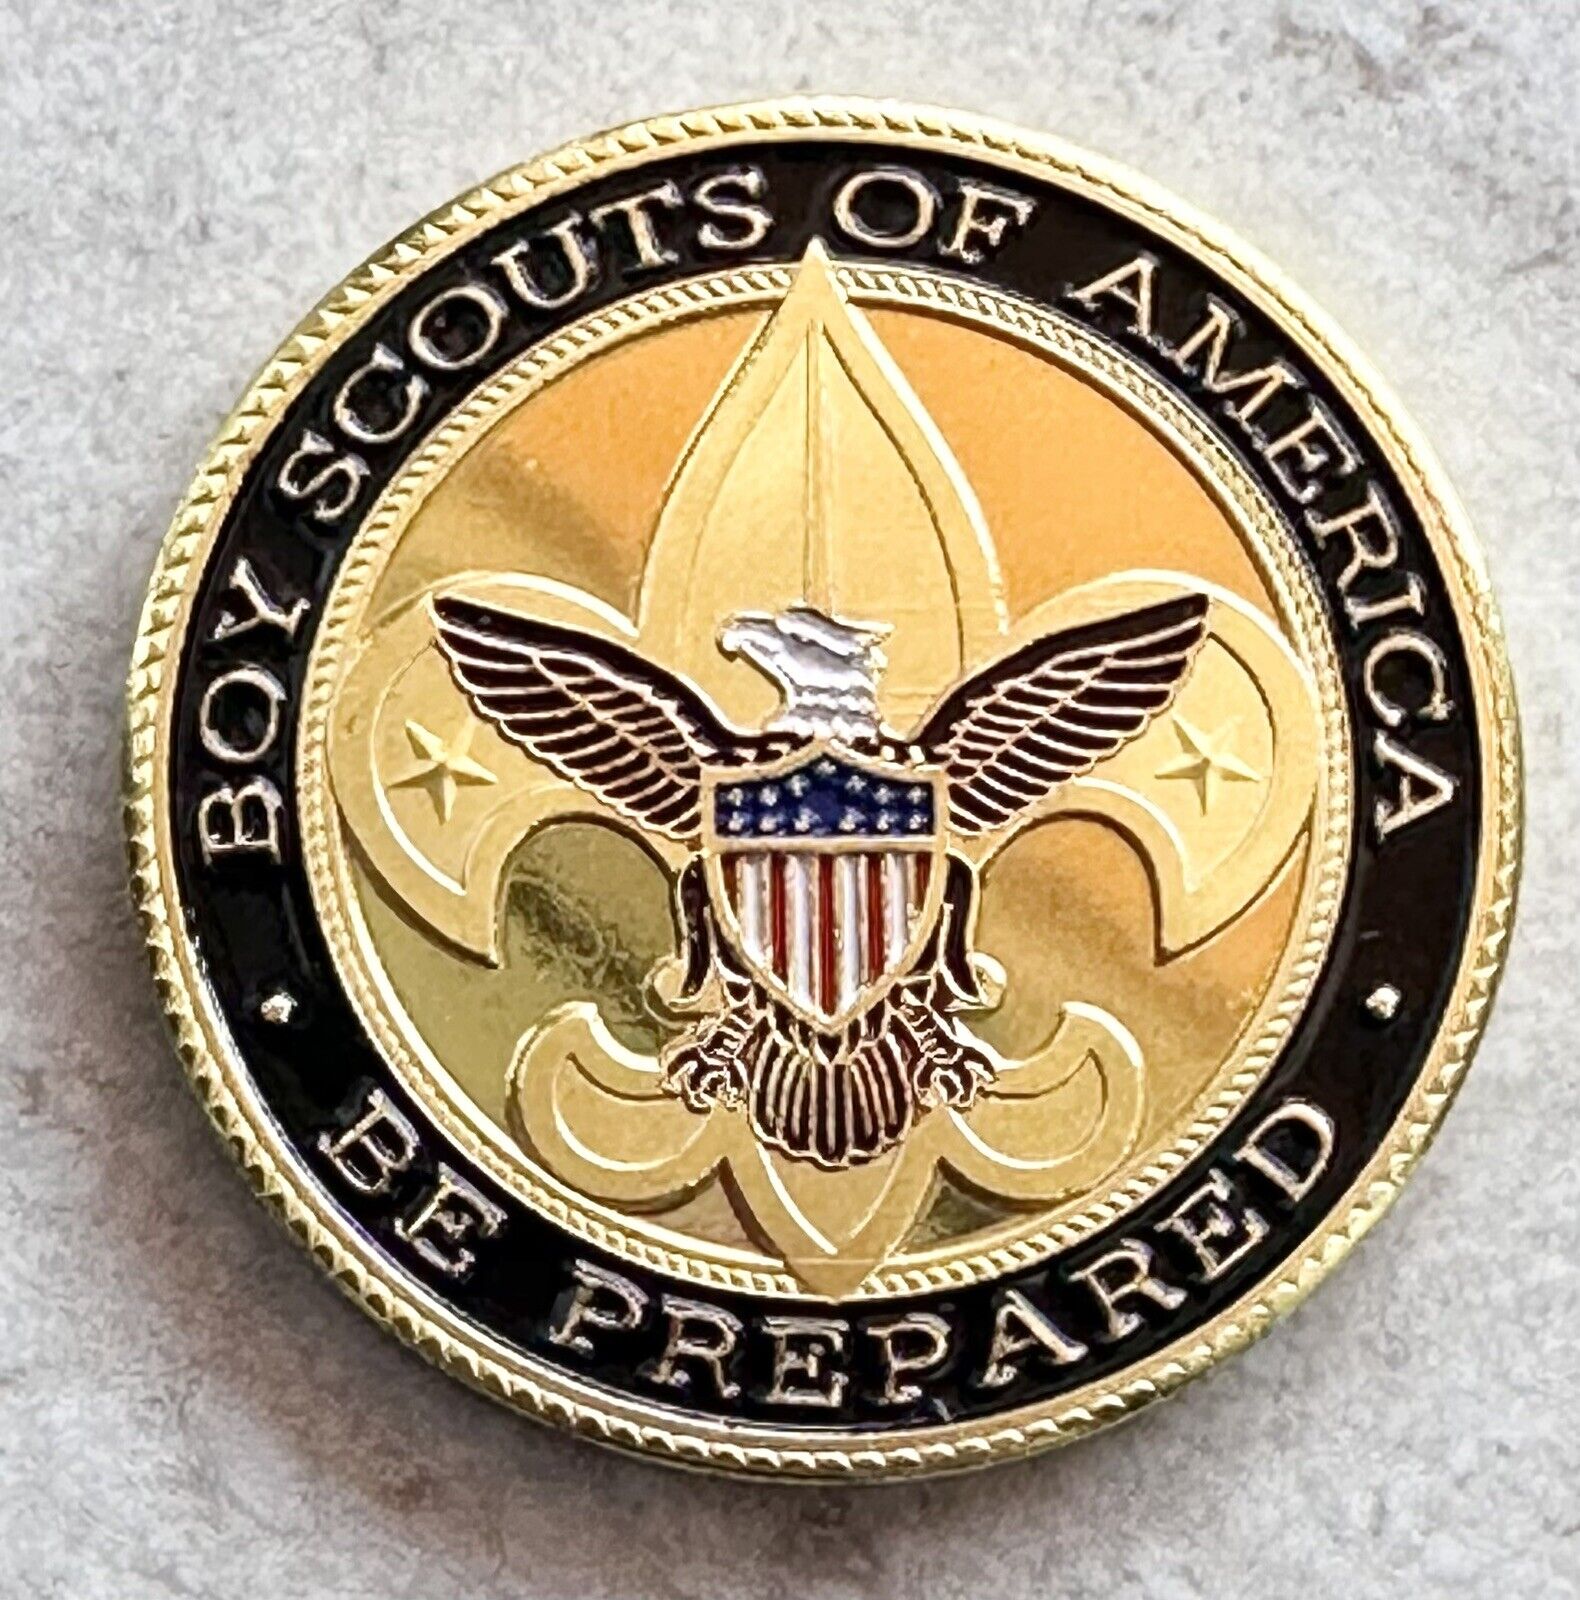 BOY SCOUTS OF AMERICA Challenge Coin 